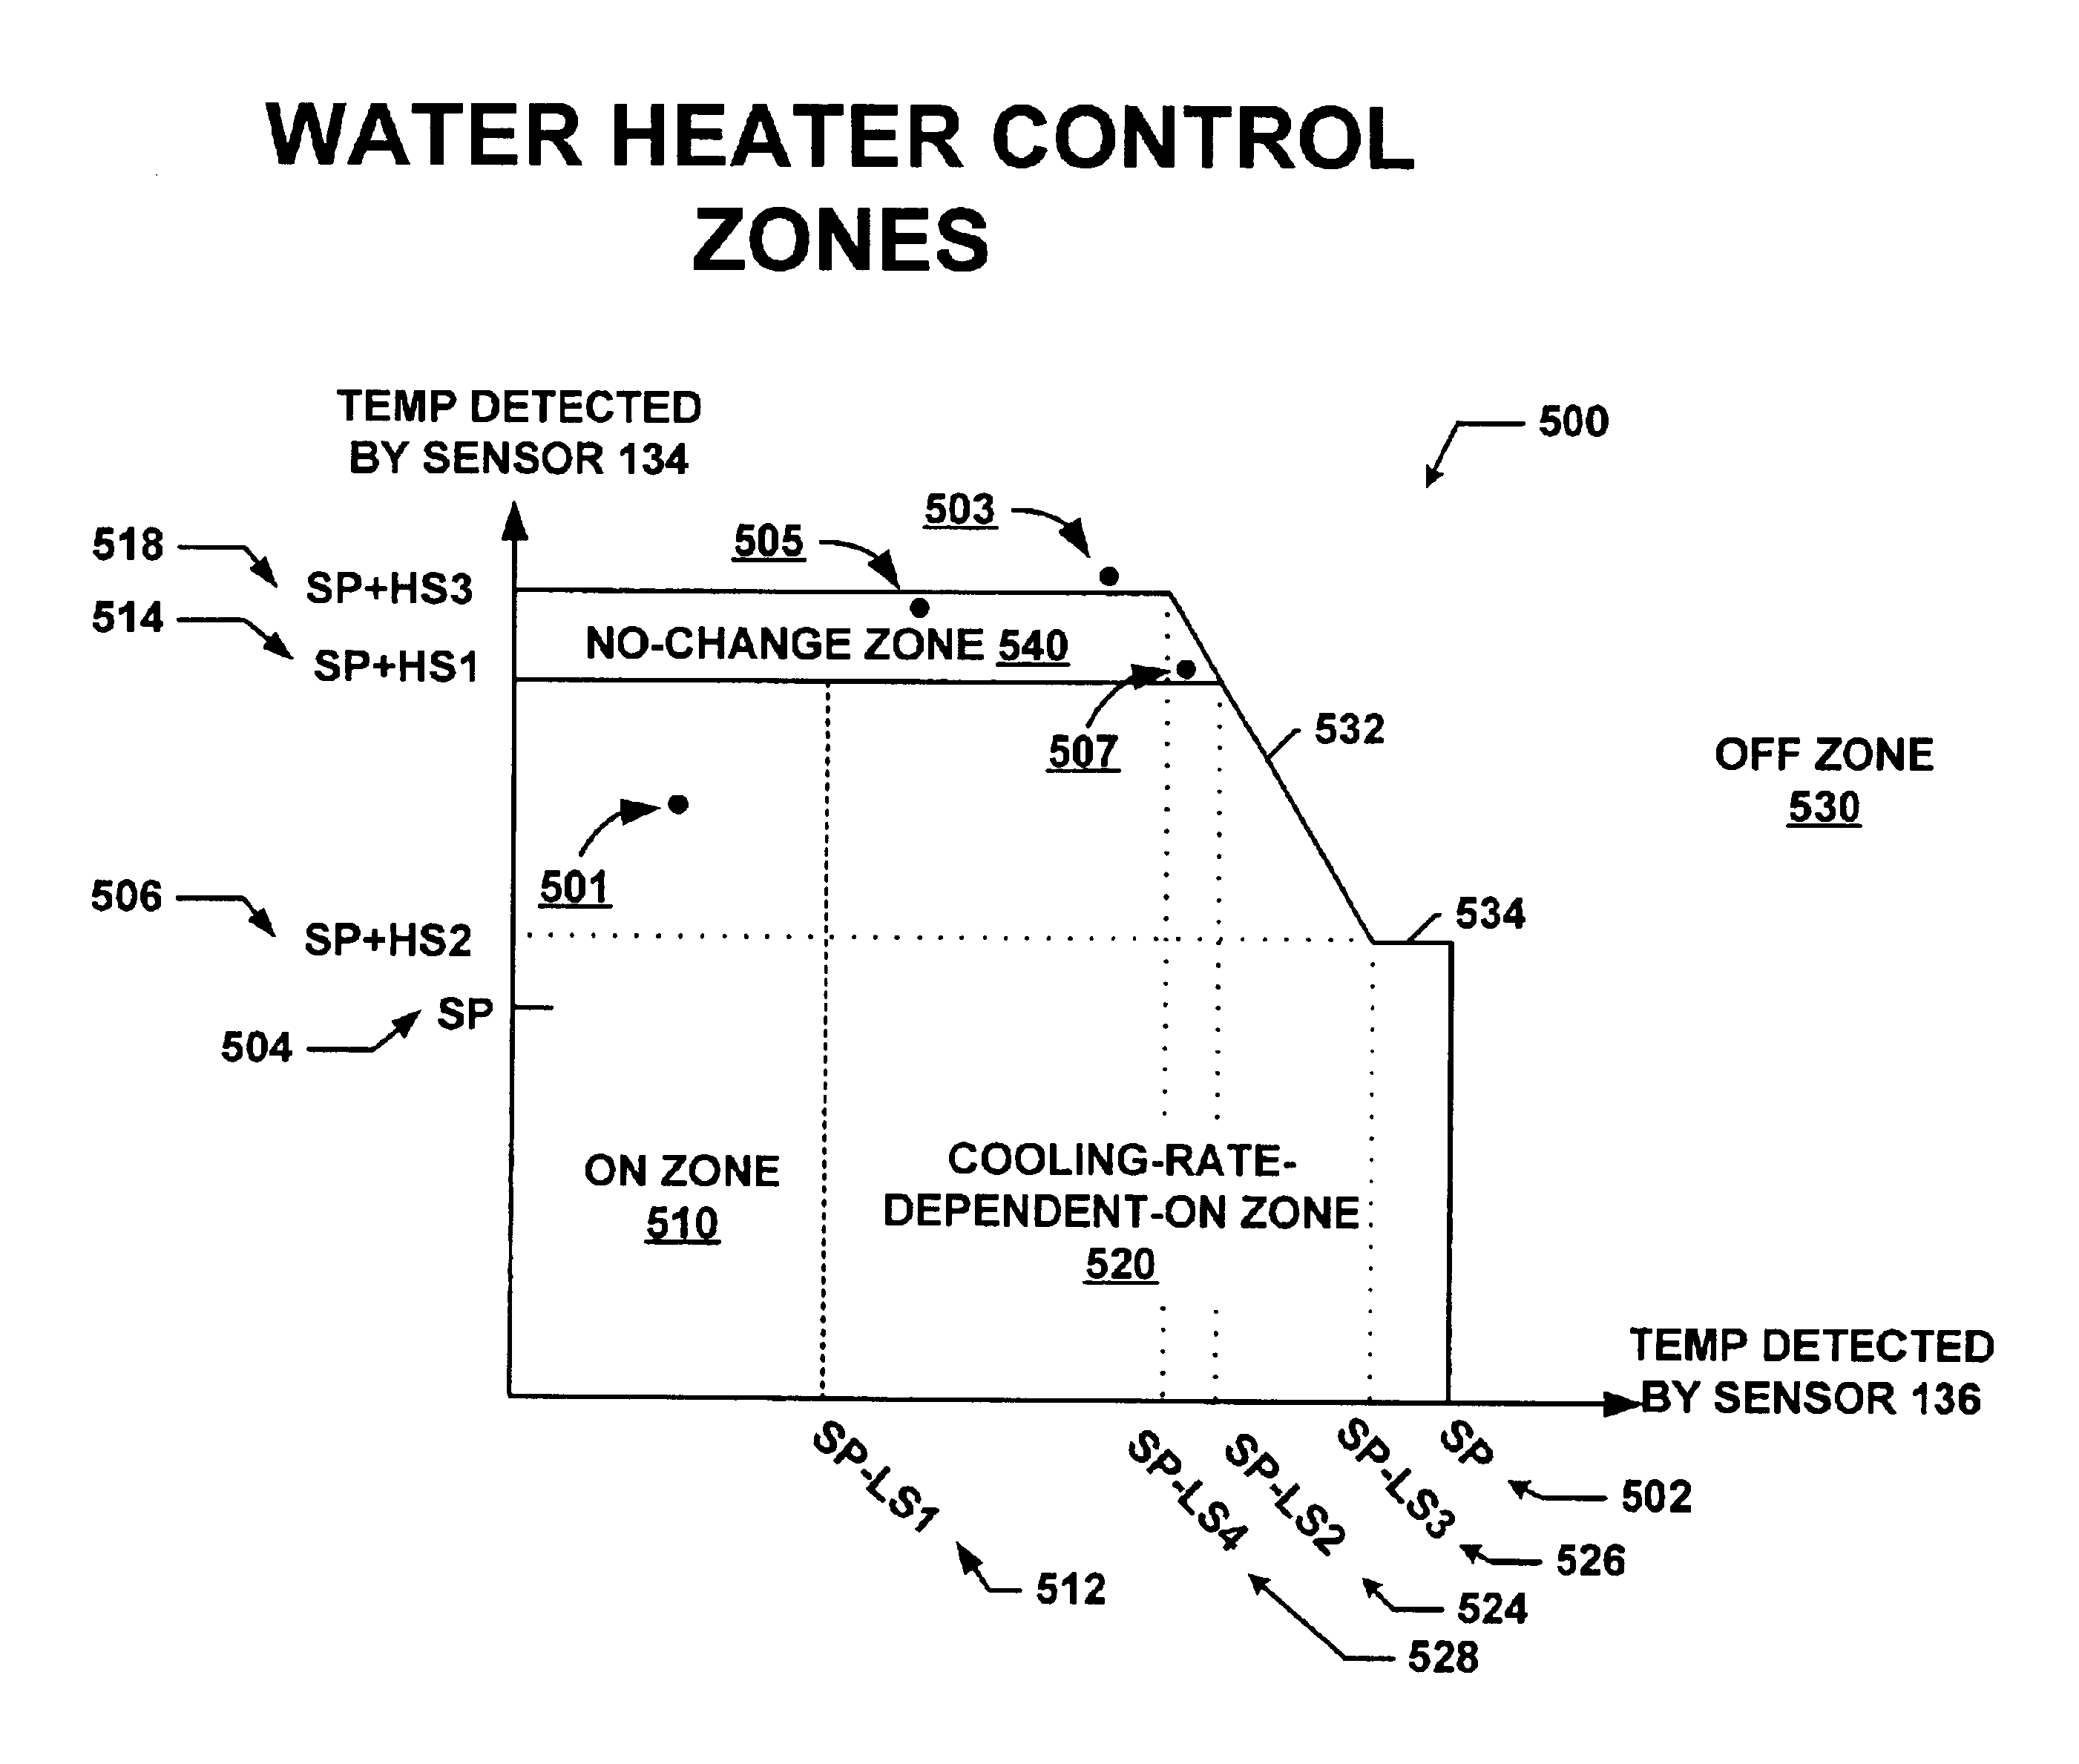 Water heater and control